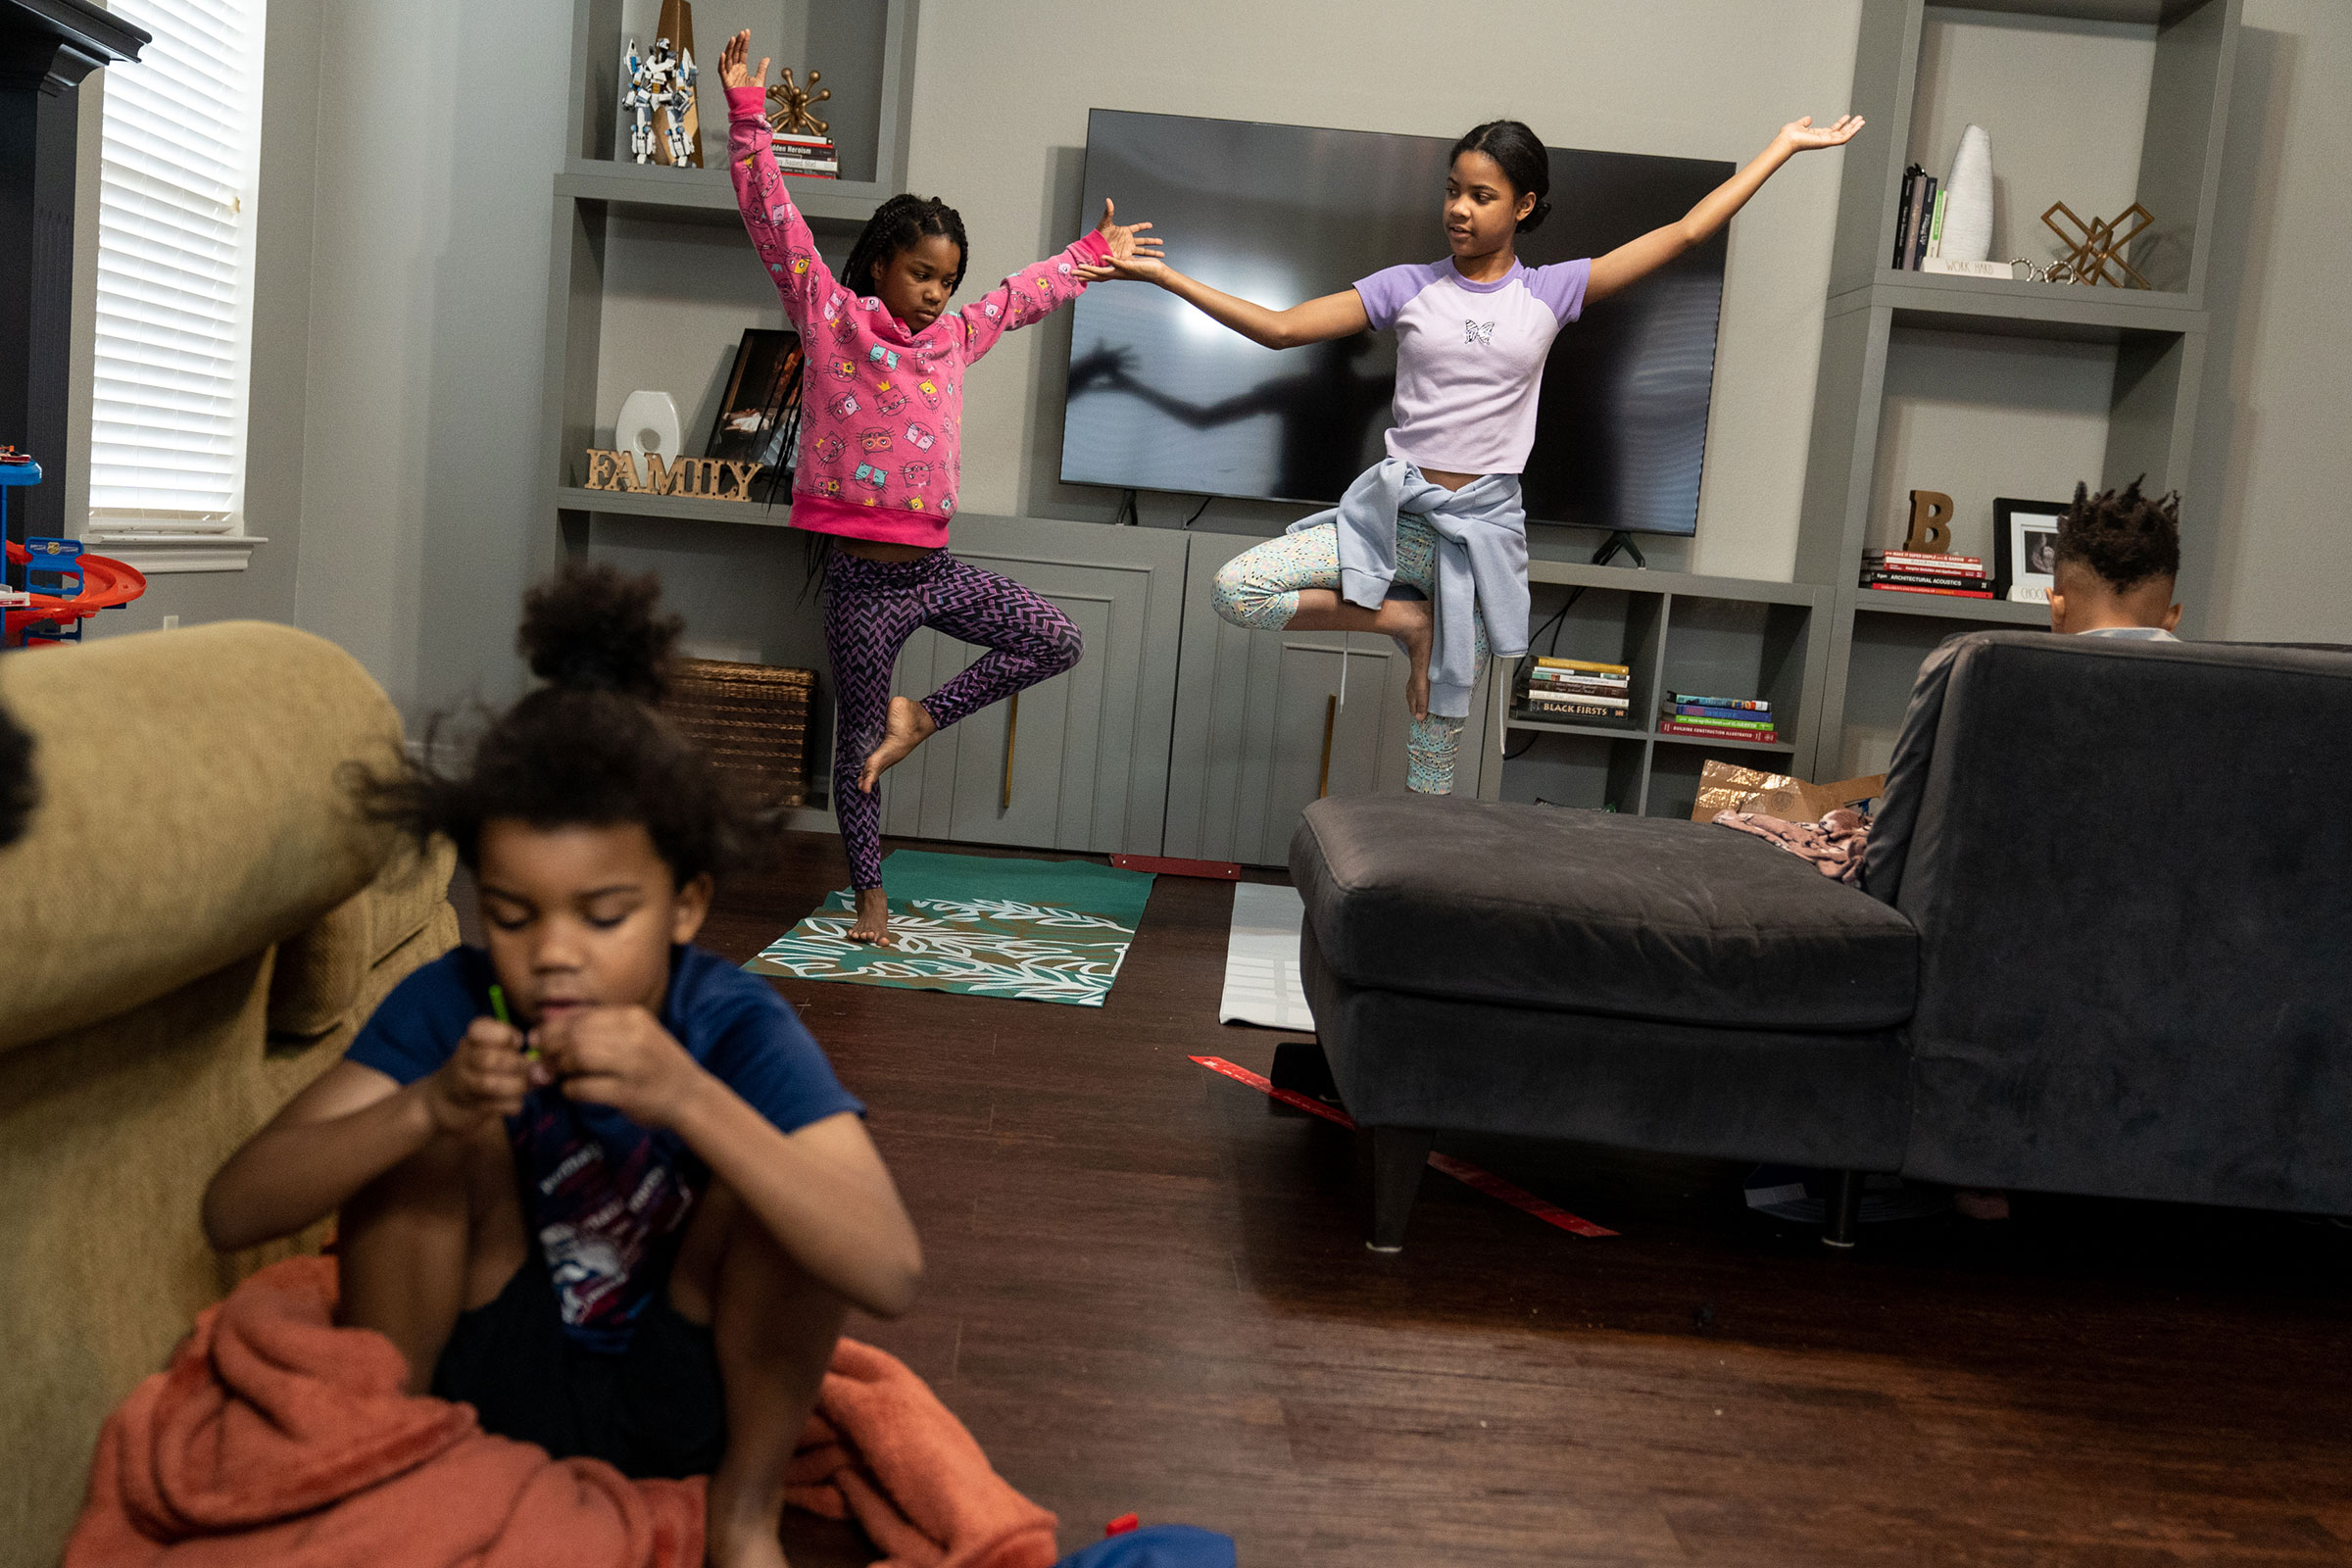 RICHARDSON, TEXAS - February 23, 2022: Bellamy, 8, and Brea, 12, do yoga in the living room. Ilana Panich-Linsman for TIME